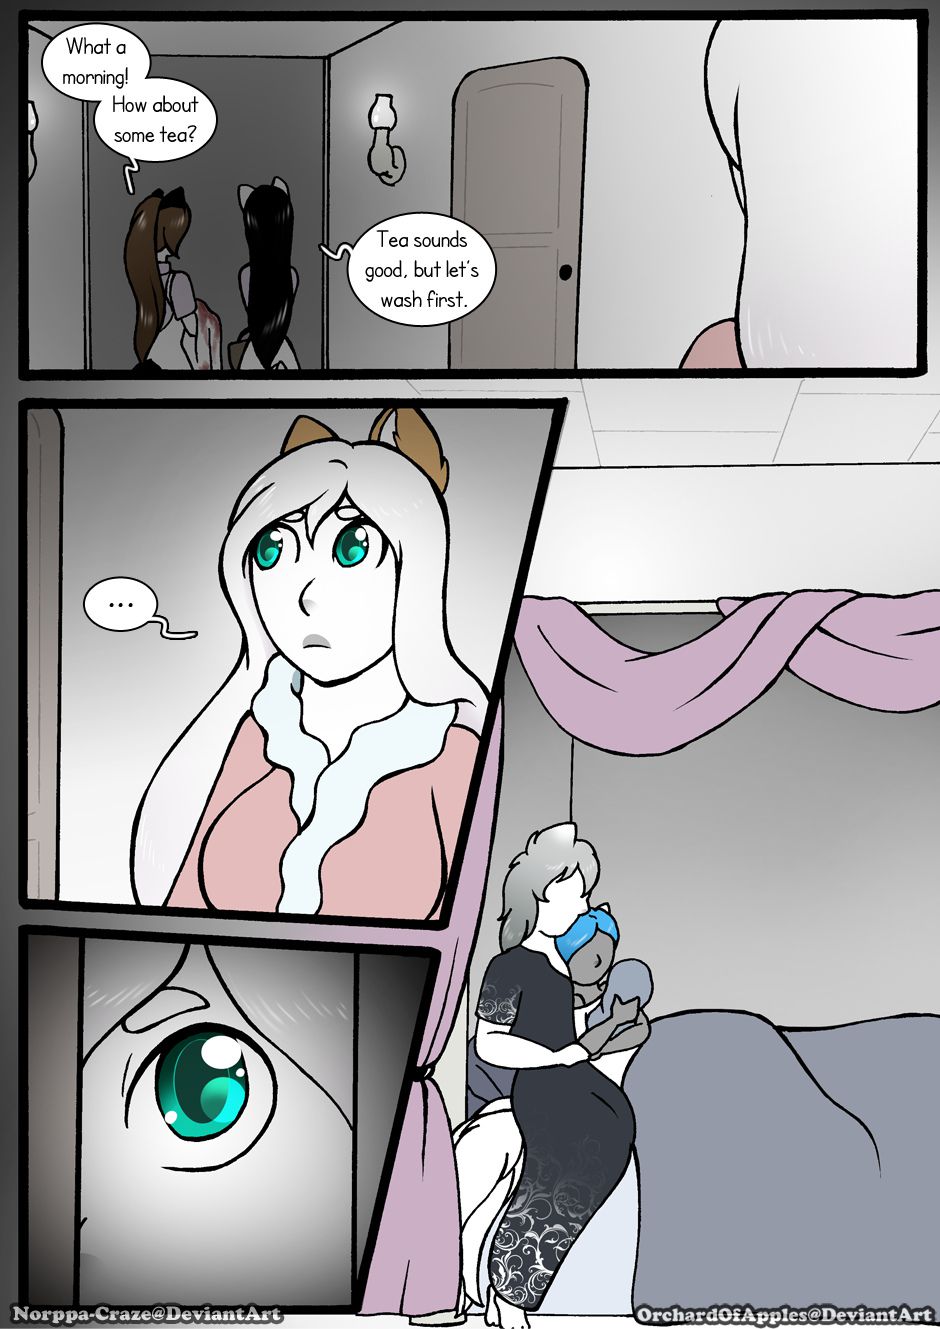 [Jeny-jen94] Between Kings and Queens [Ongoing] 337